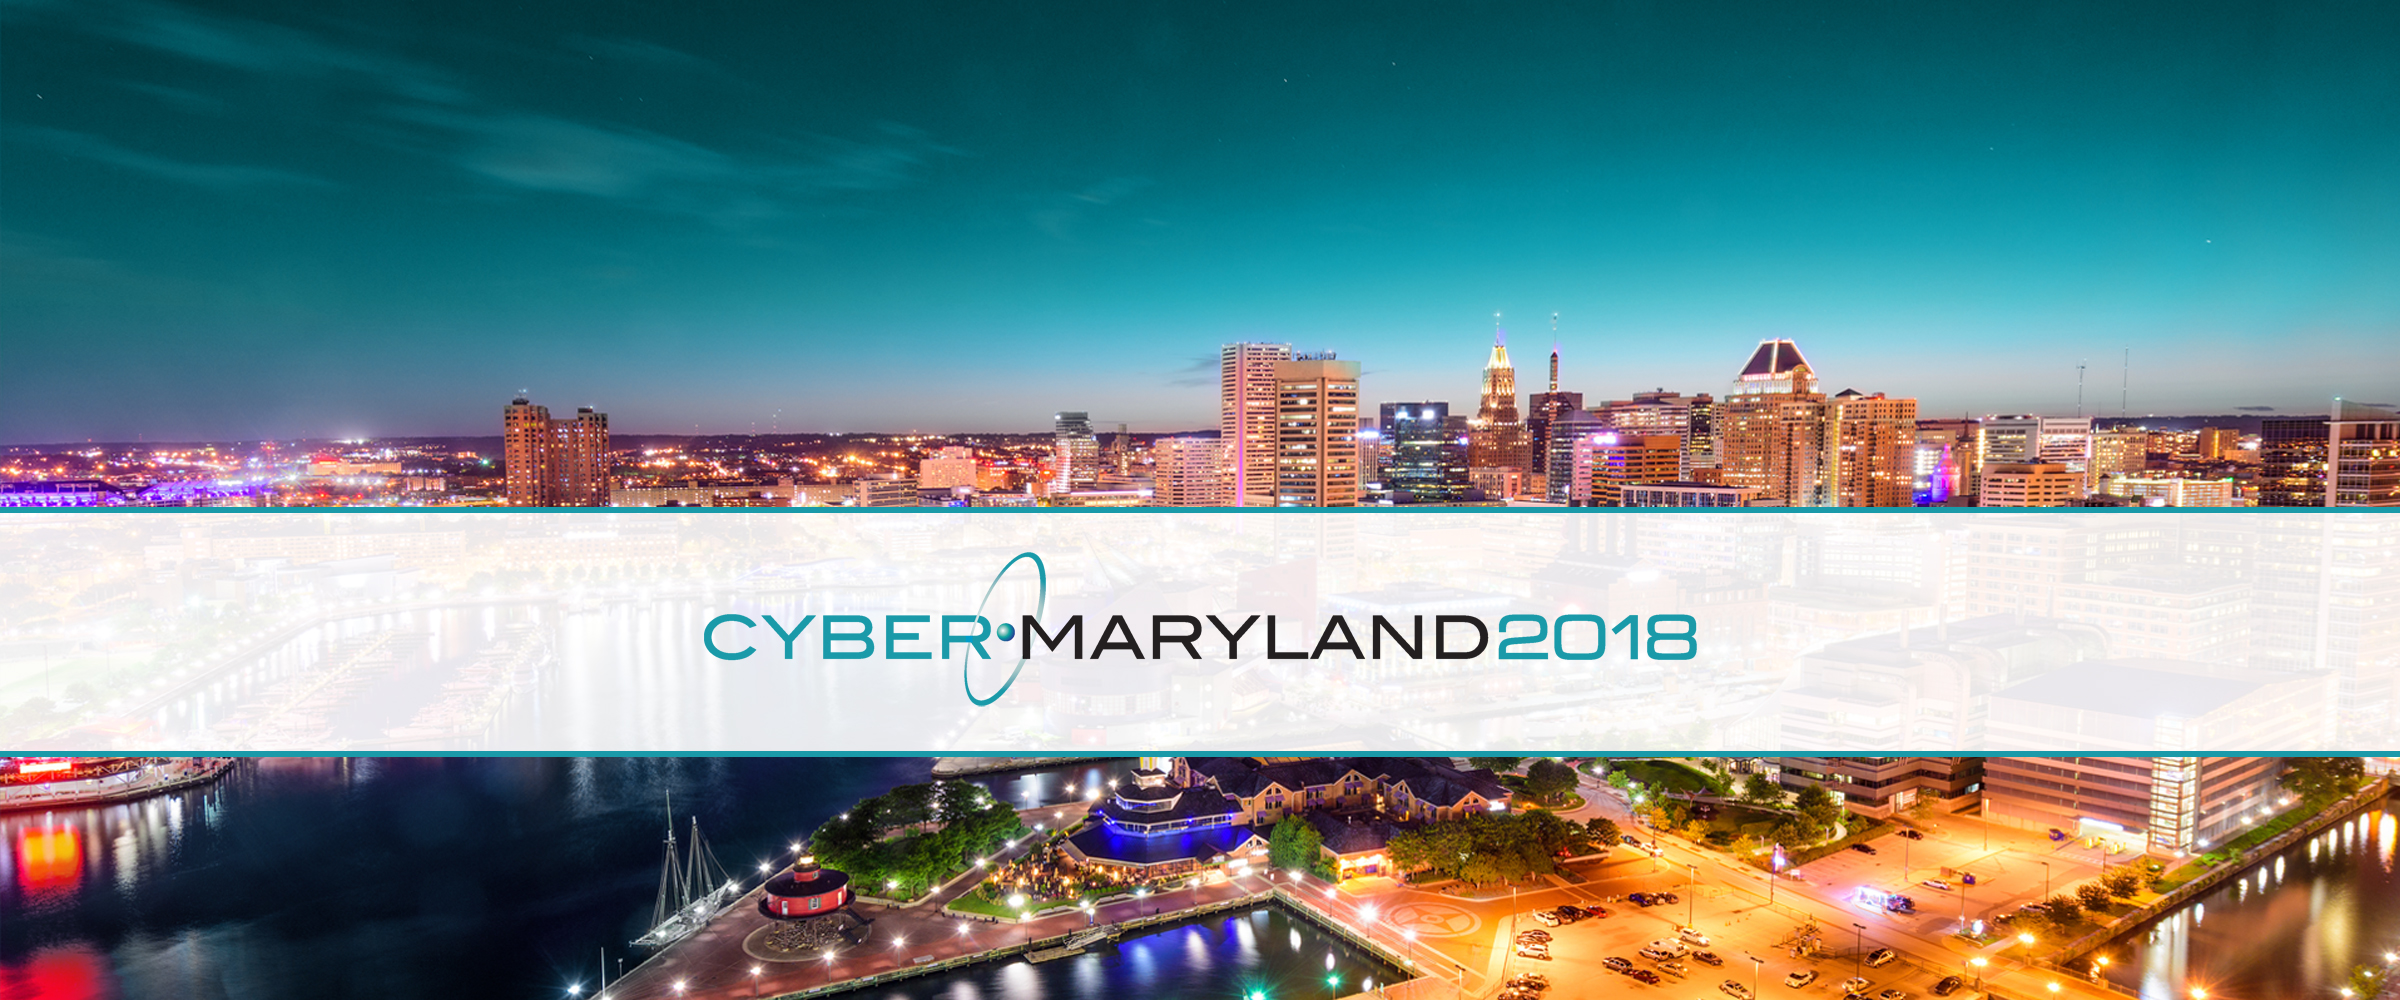 CyberMaryland 2018 Conference